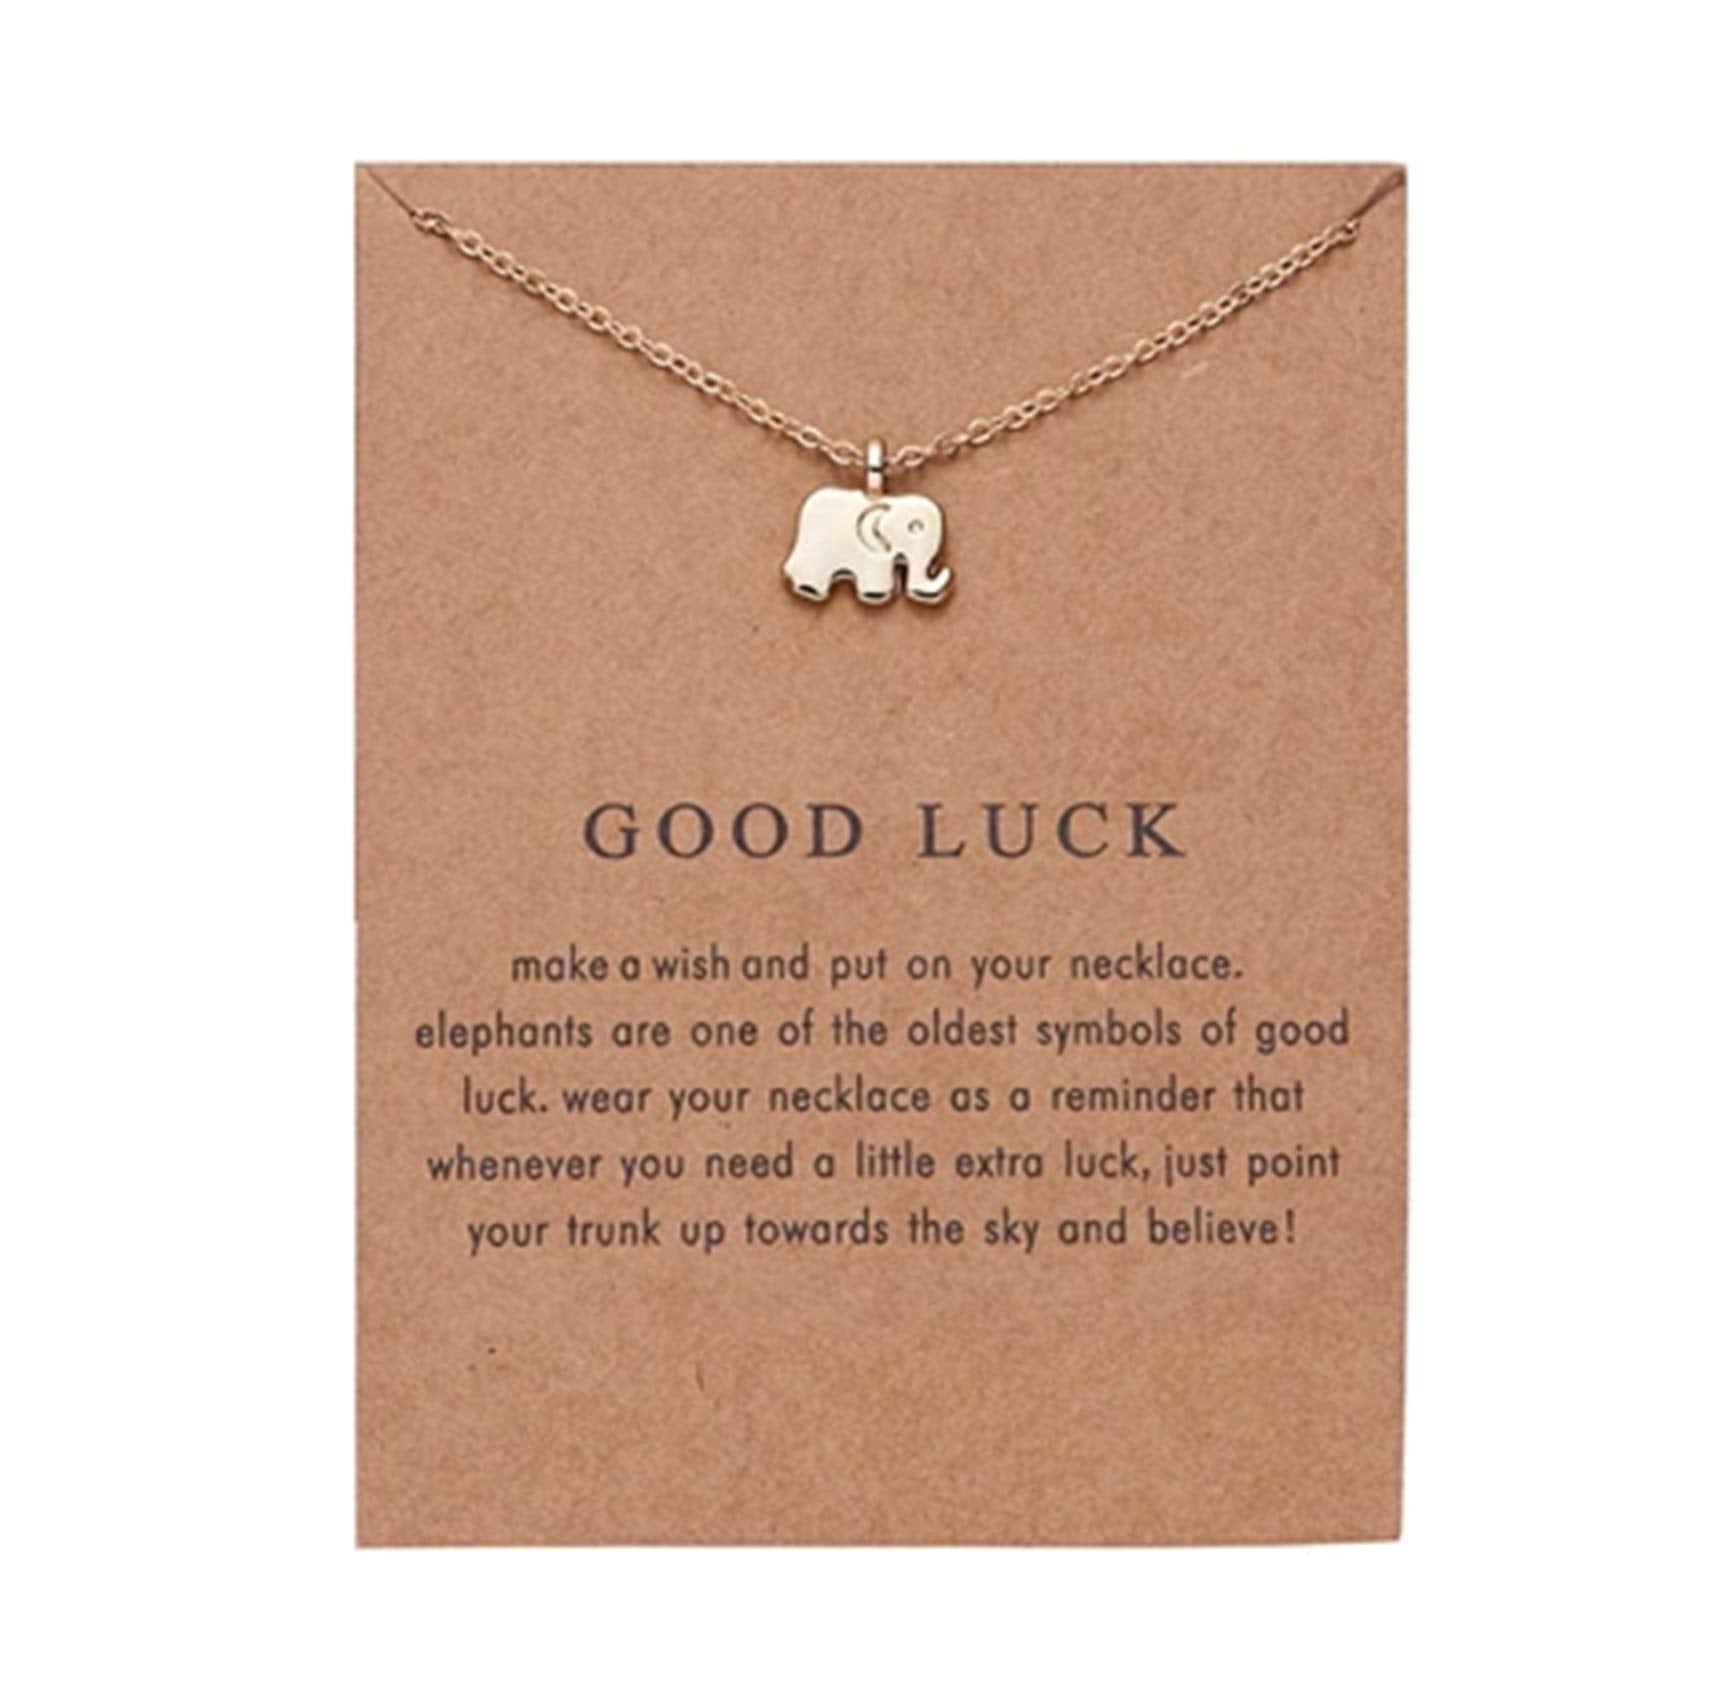 Elephant Charm Necklace, Good Luck Friendship pendant and chain, gold tone